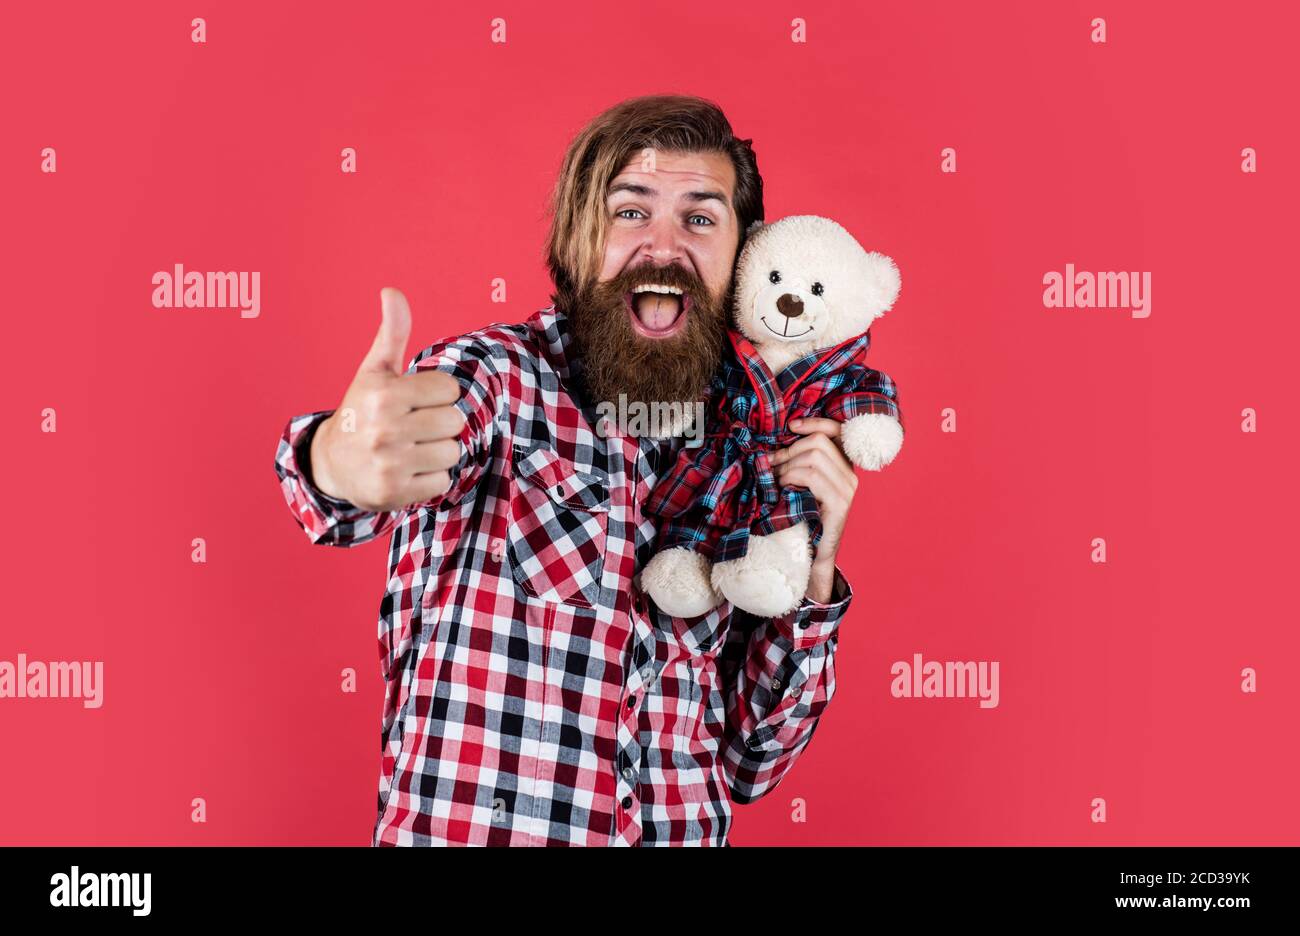 best offer. Man holds teddy bear. Gifts and holidays concept. This is for you. hipster like animal toy. Birthday holiday party celebration. feel happiness. Man with beard hold cute toy bear. Stock Photo